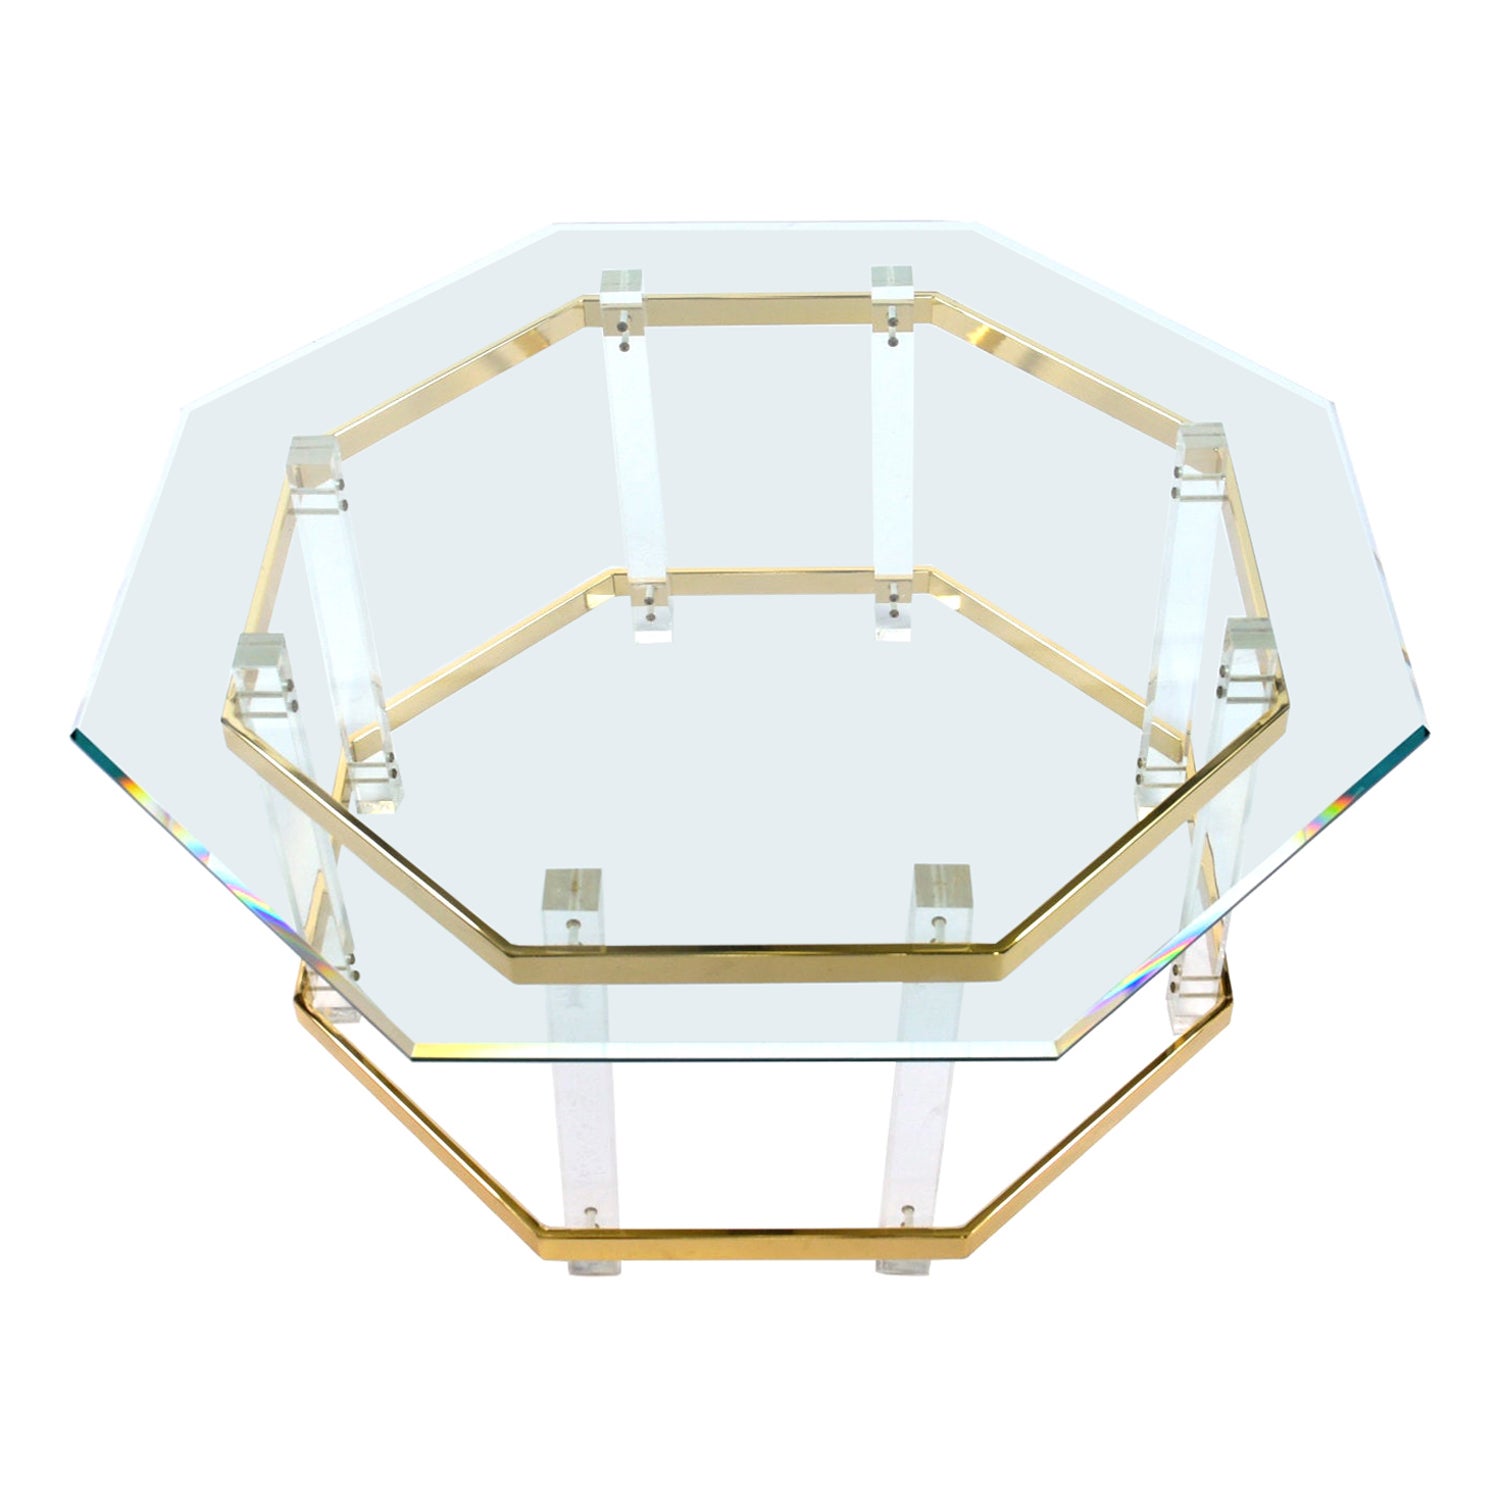 Vintage 1980s Charles Hollis Jones style lucite and brass coffee table with beveled hexagon glass top. The geometric beveled glass top creates a silhouette mimicking the dynamic angles and form of the table base. Vertical acrylic architectural